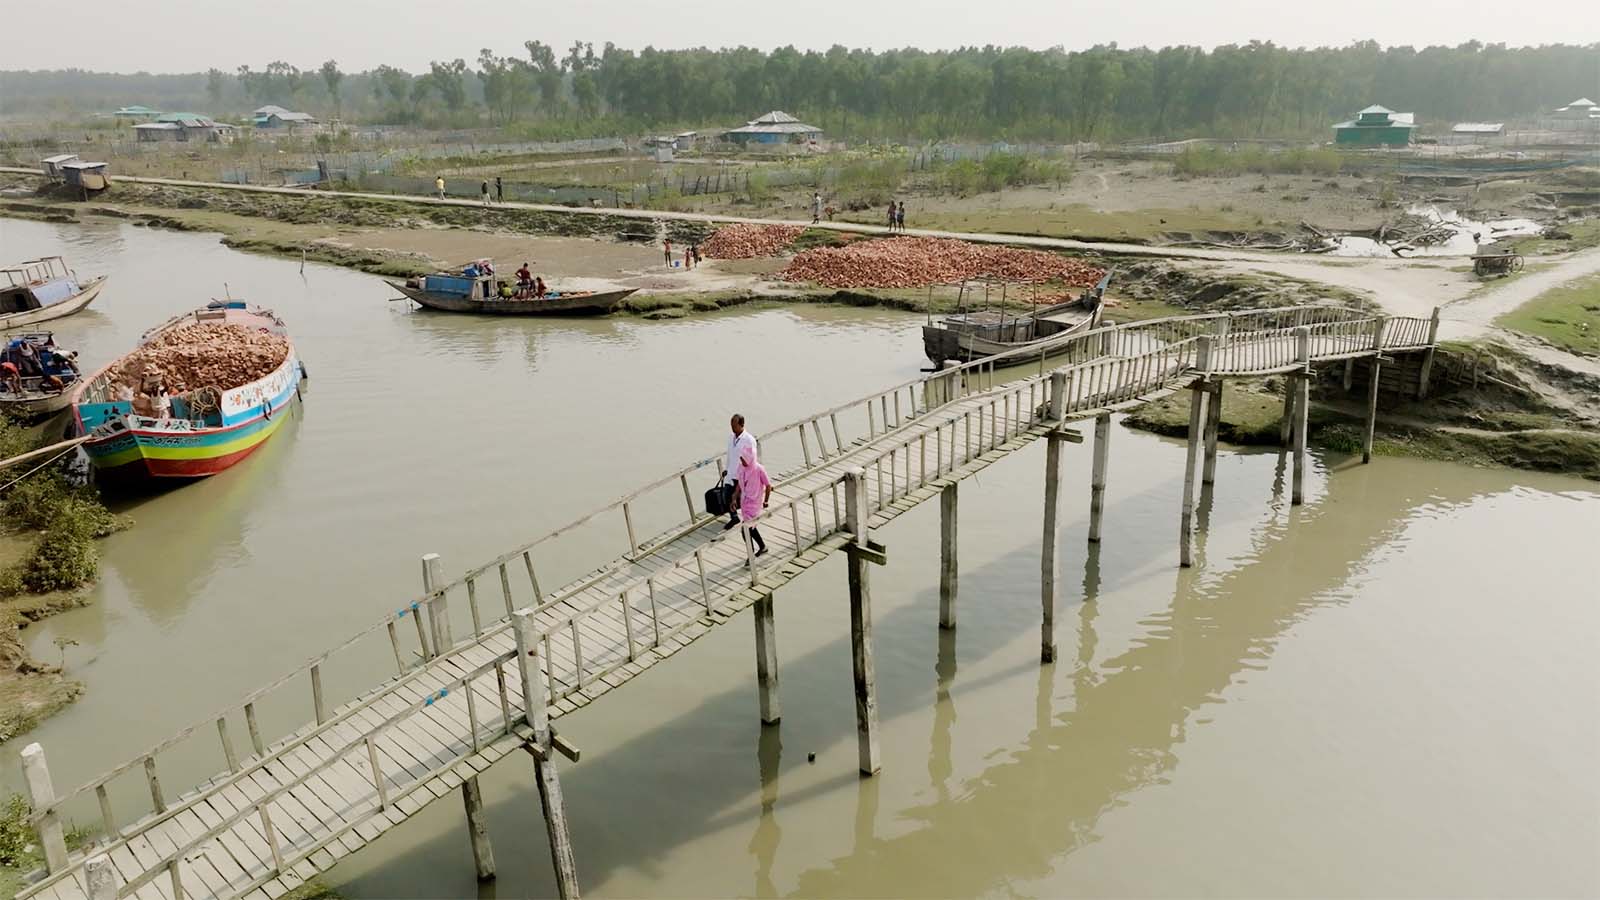 Midwife and doctor crossing a bridge in Bangladesh